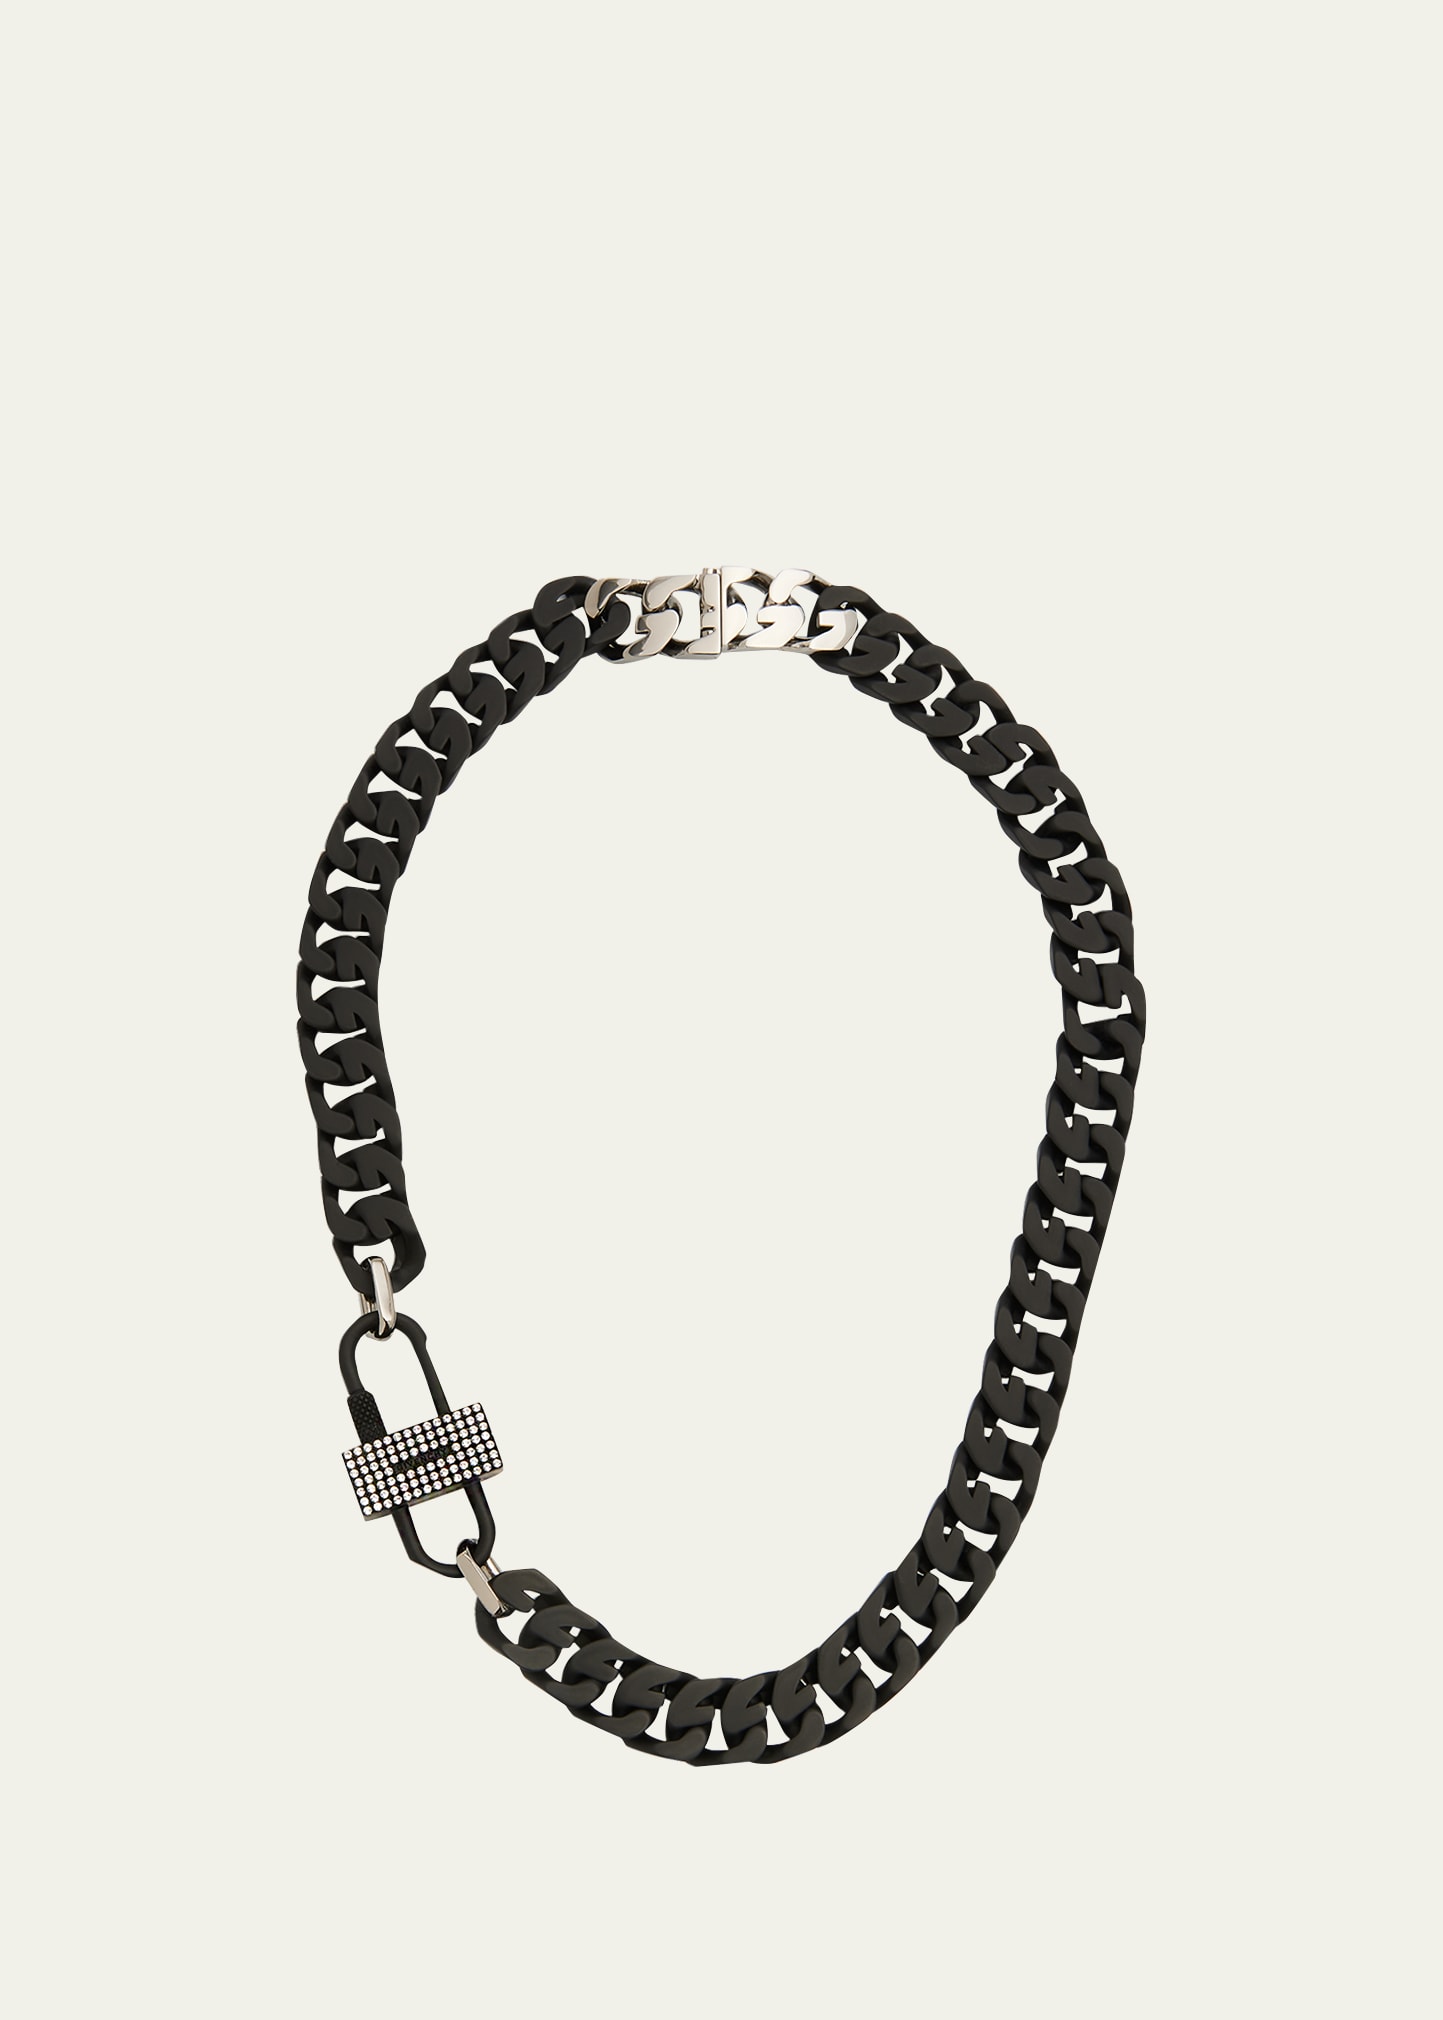 GIVENCHY MEN'S CRYSTAL PAVÉ G-CHAIN NECKLACE